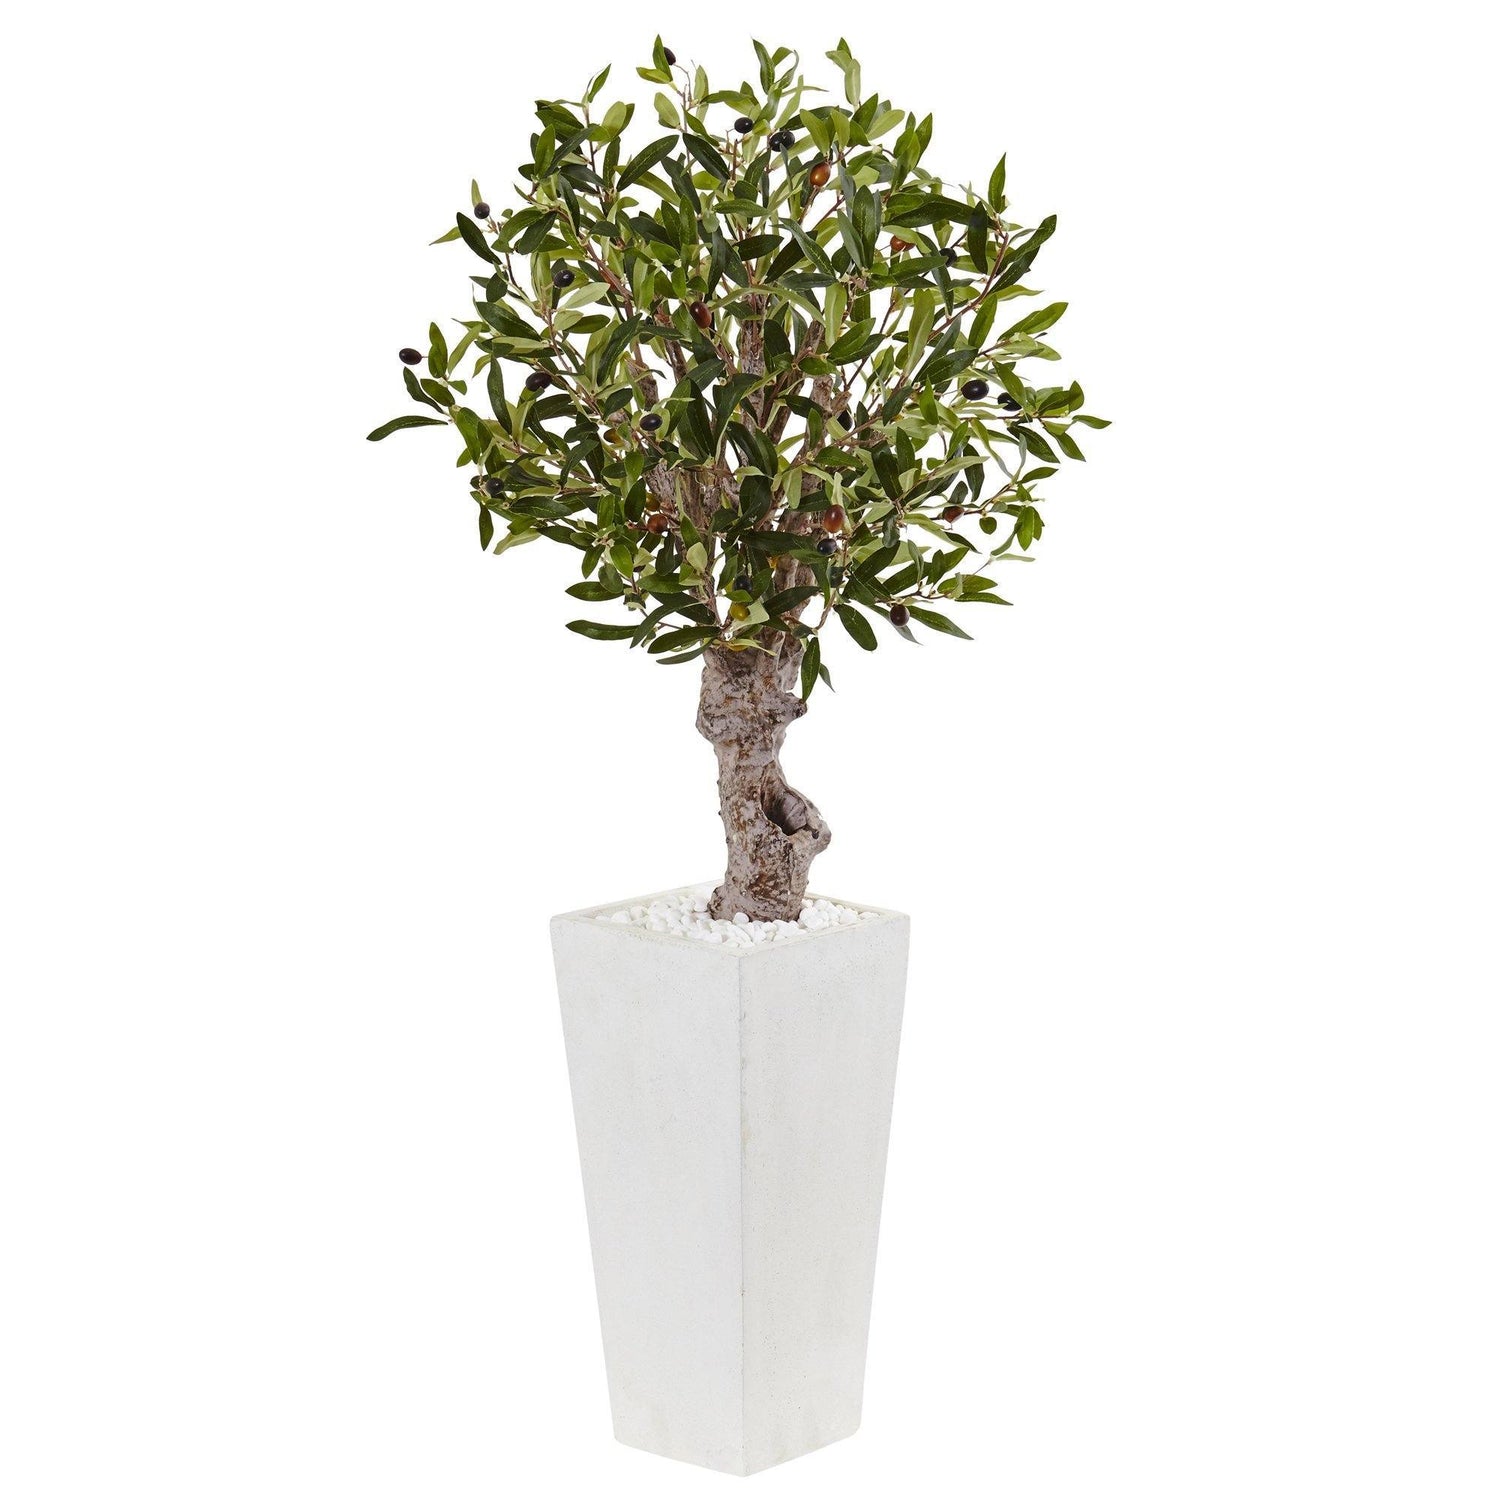 3.5’ Olive Tree in White Tower Planter